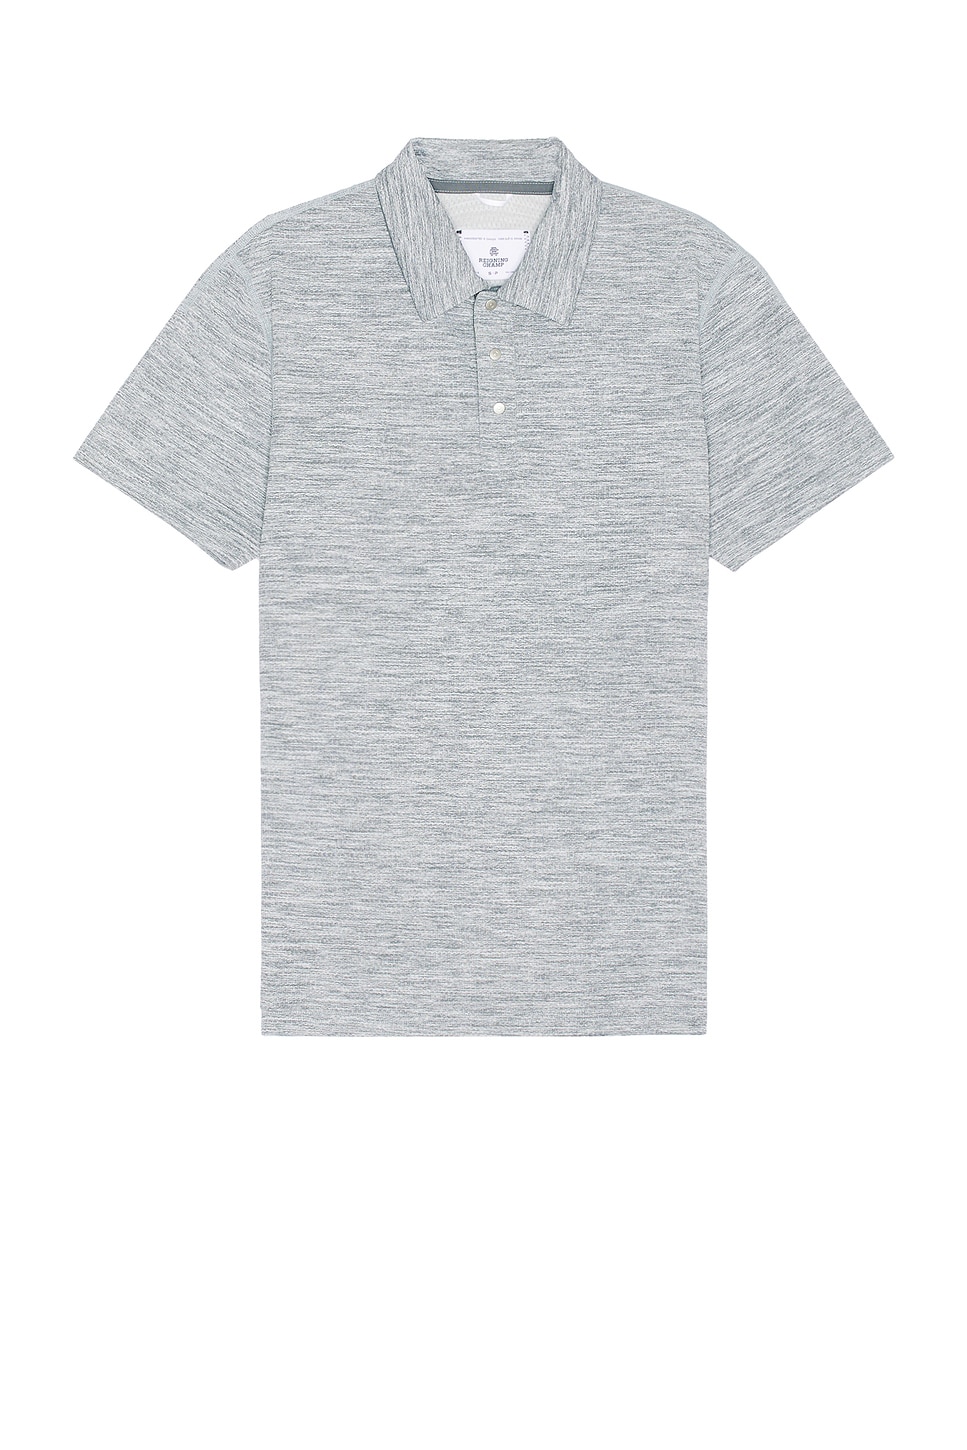 Solotex Mesh Polo in Light Grey